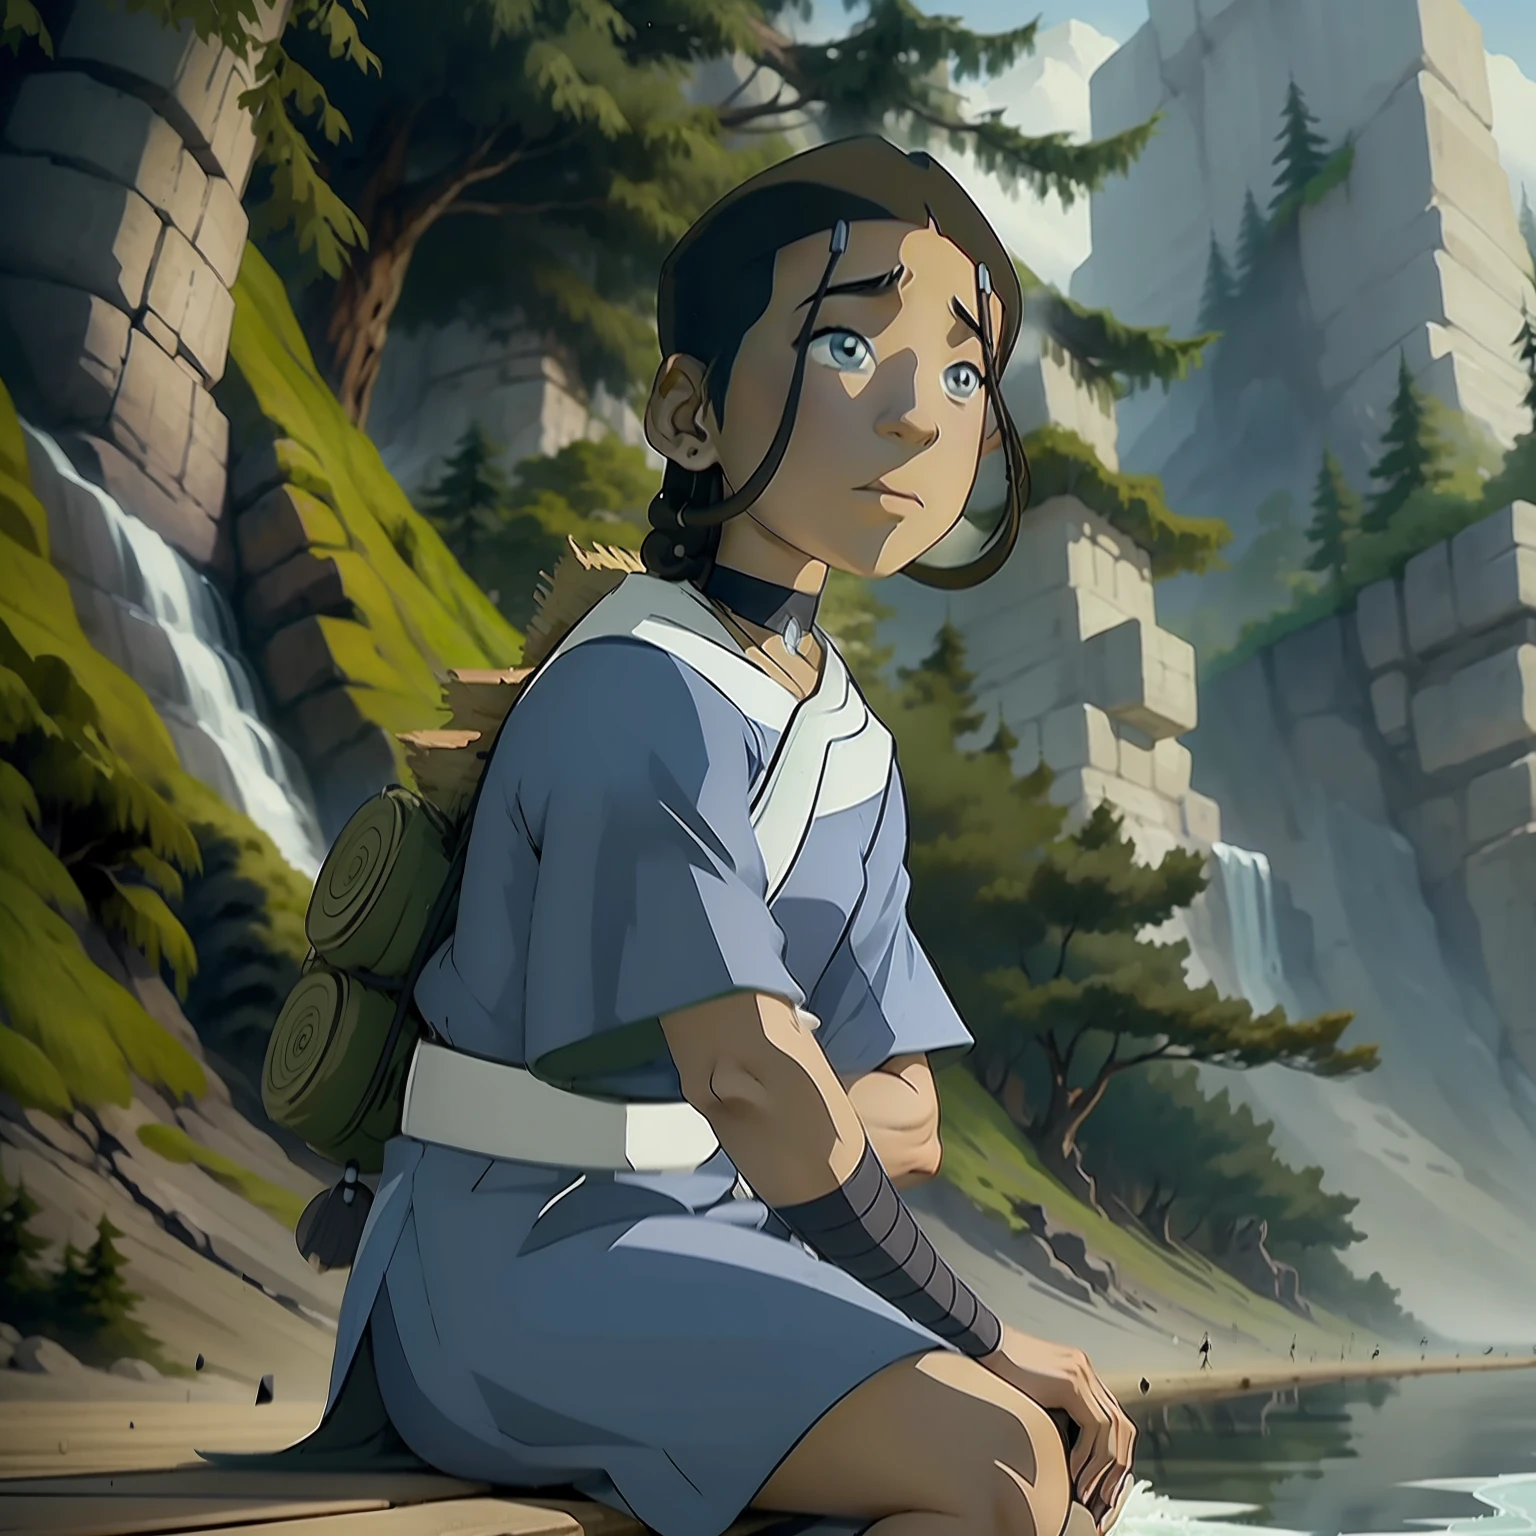 Katara at the shore of the water, in a sitting position, in front of a forest background